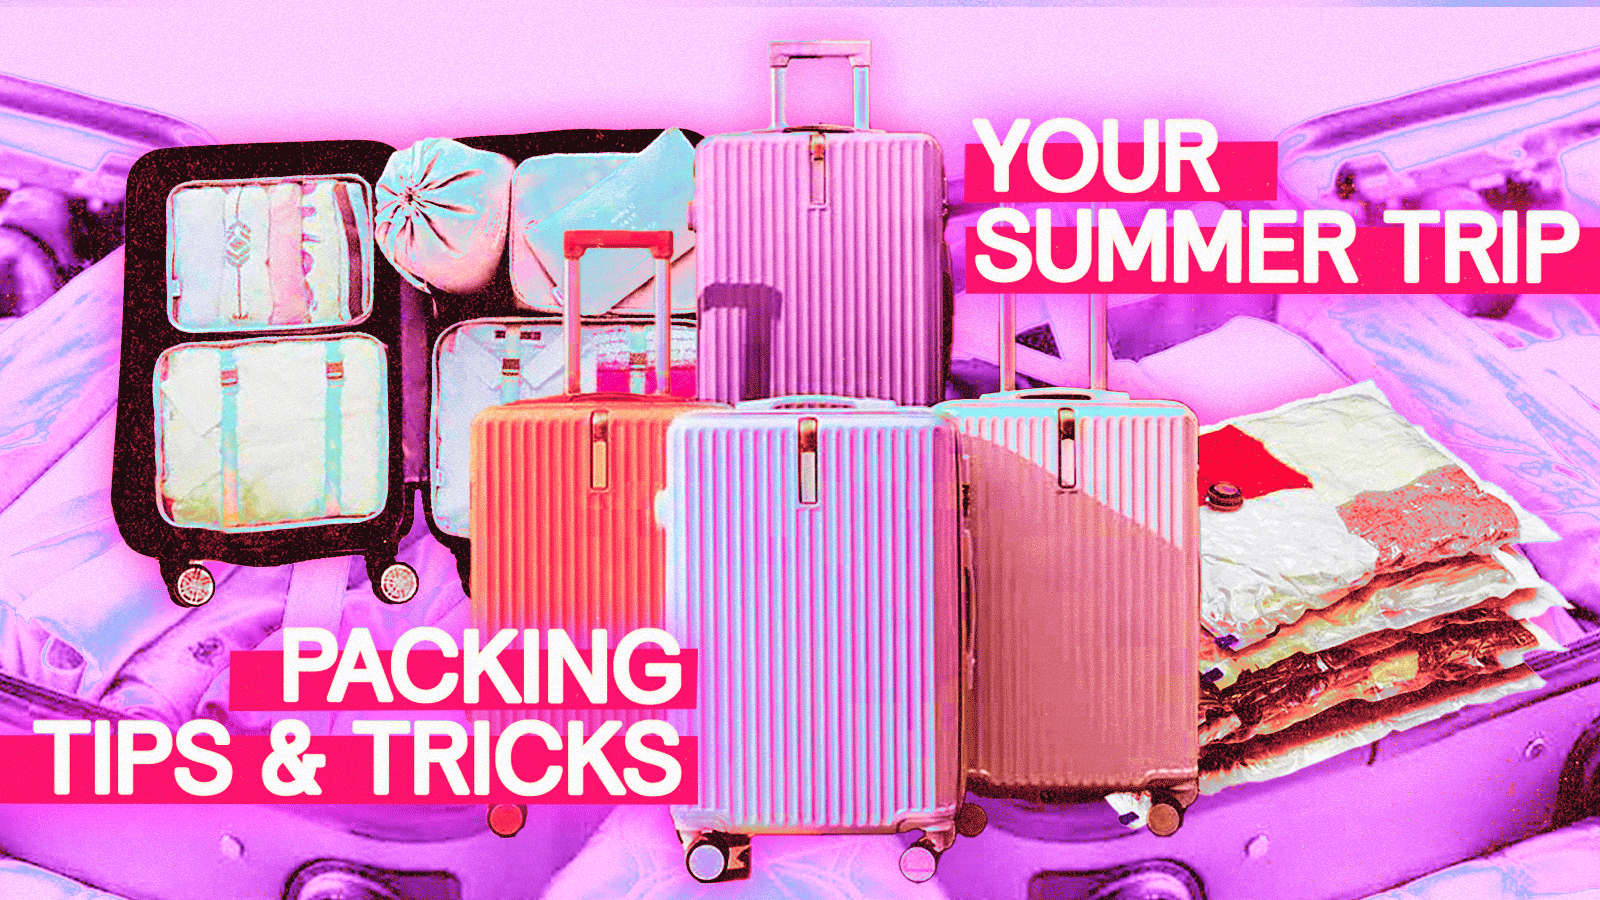 6 (And More) Travel Packing Tips and Tricks That’ll Take The Stress Away From Your Summer Trip